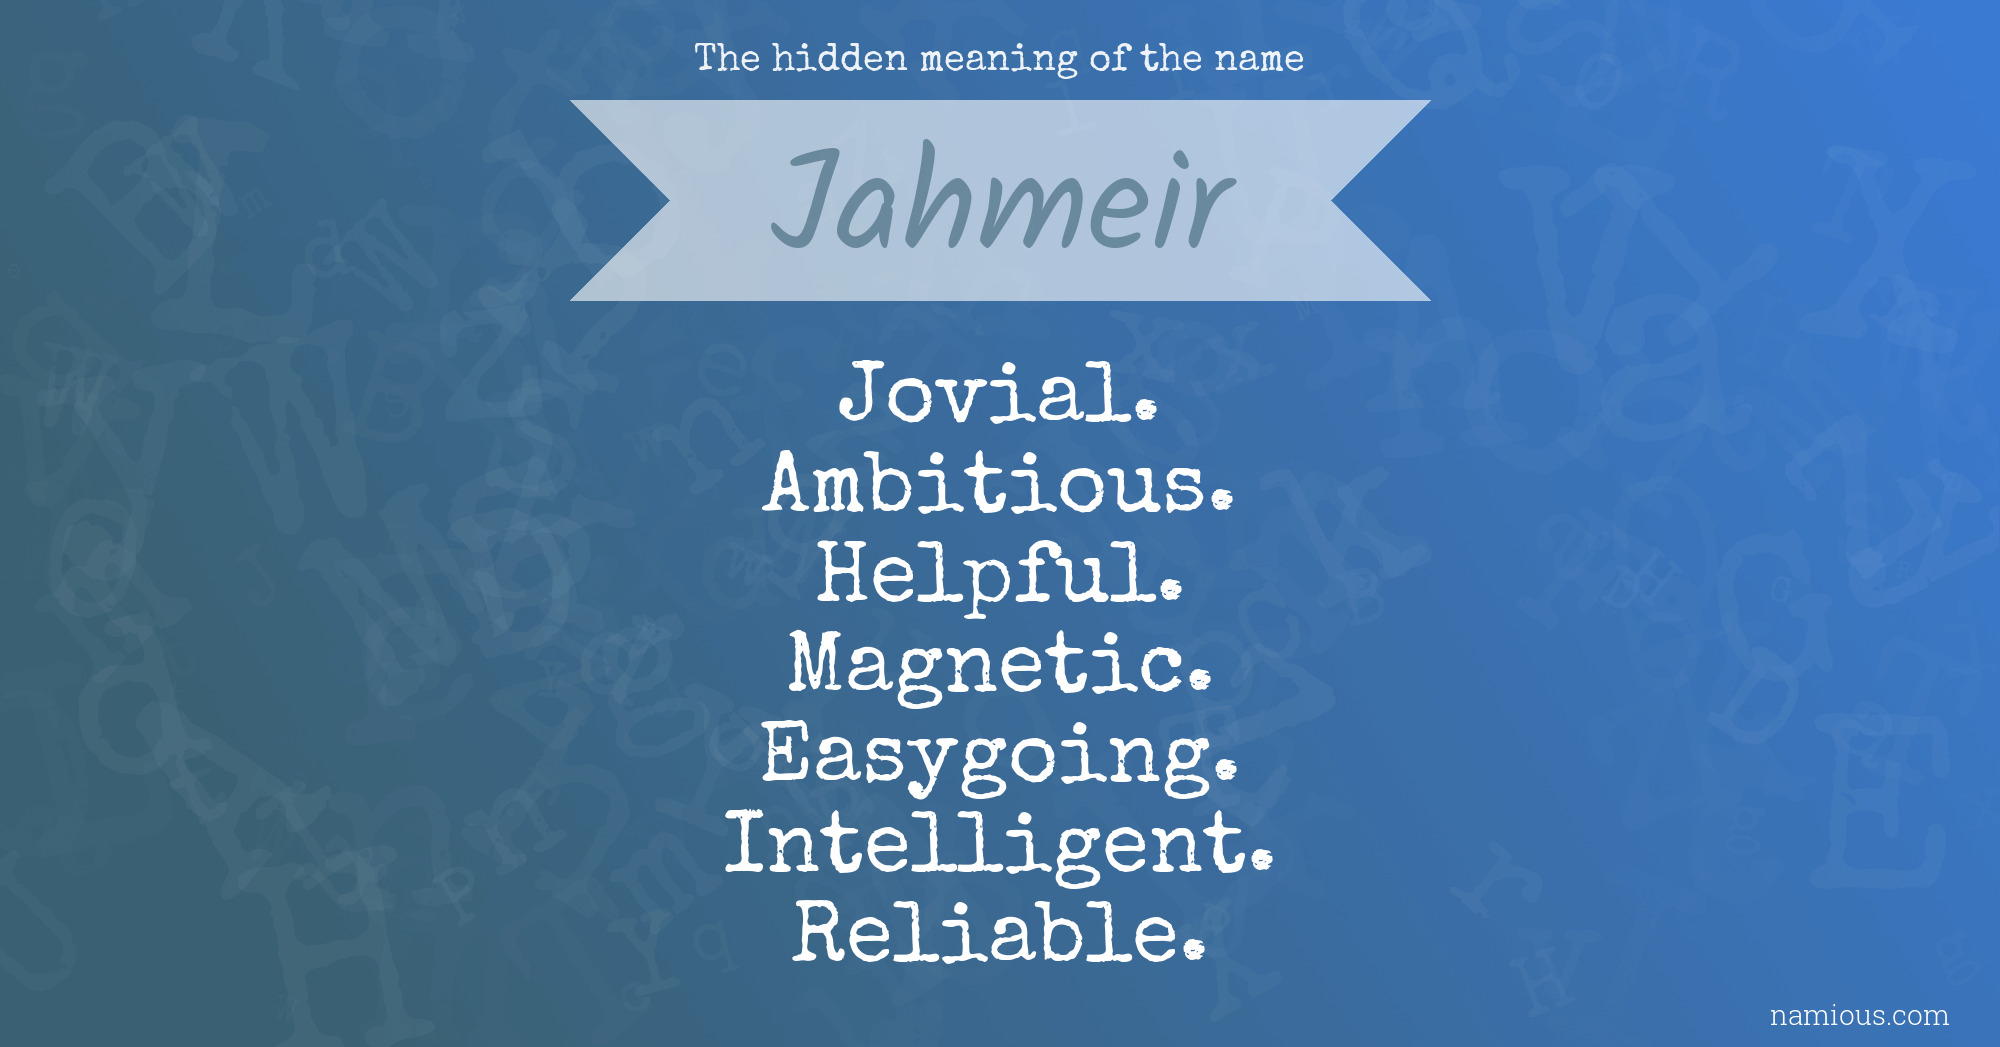 The hidden meaning of the name Jahmeir